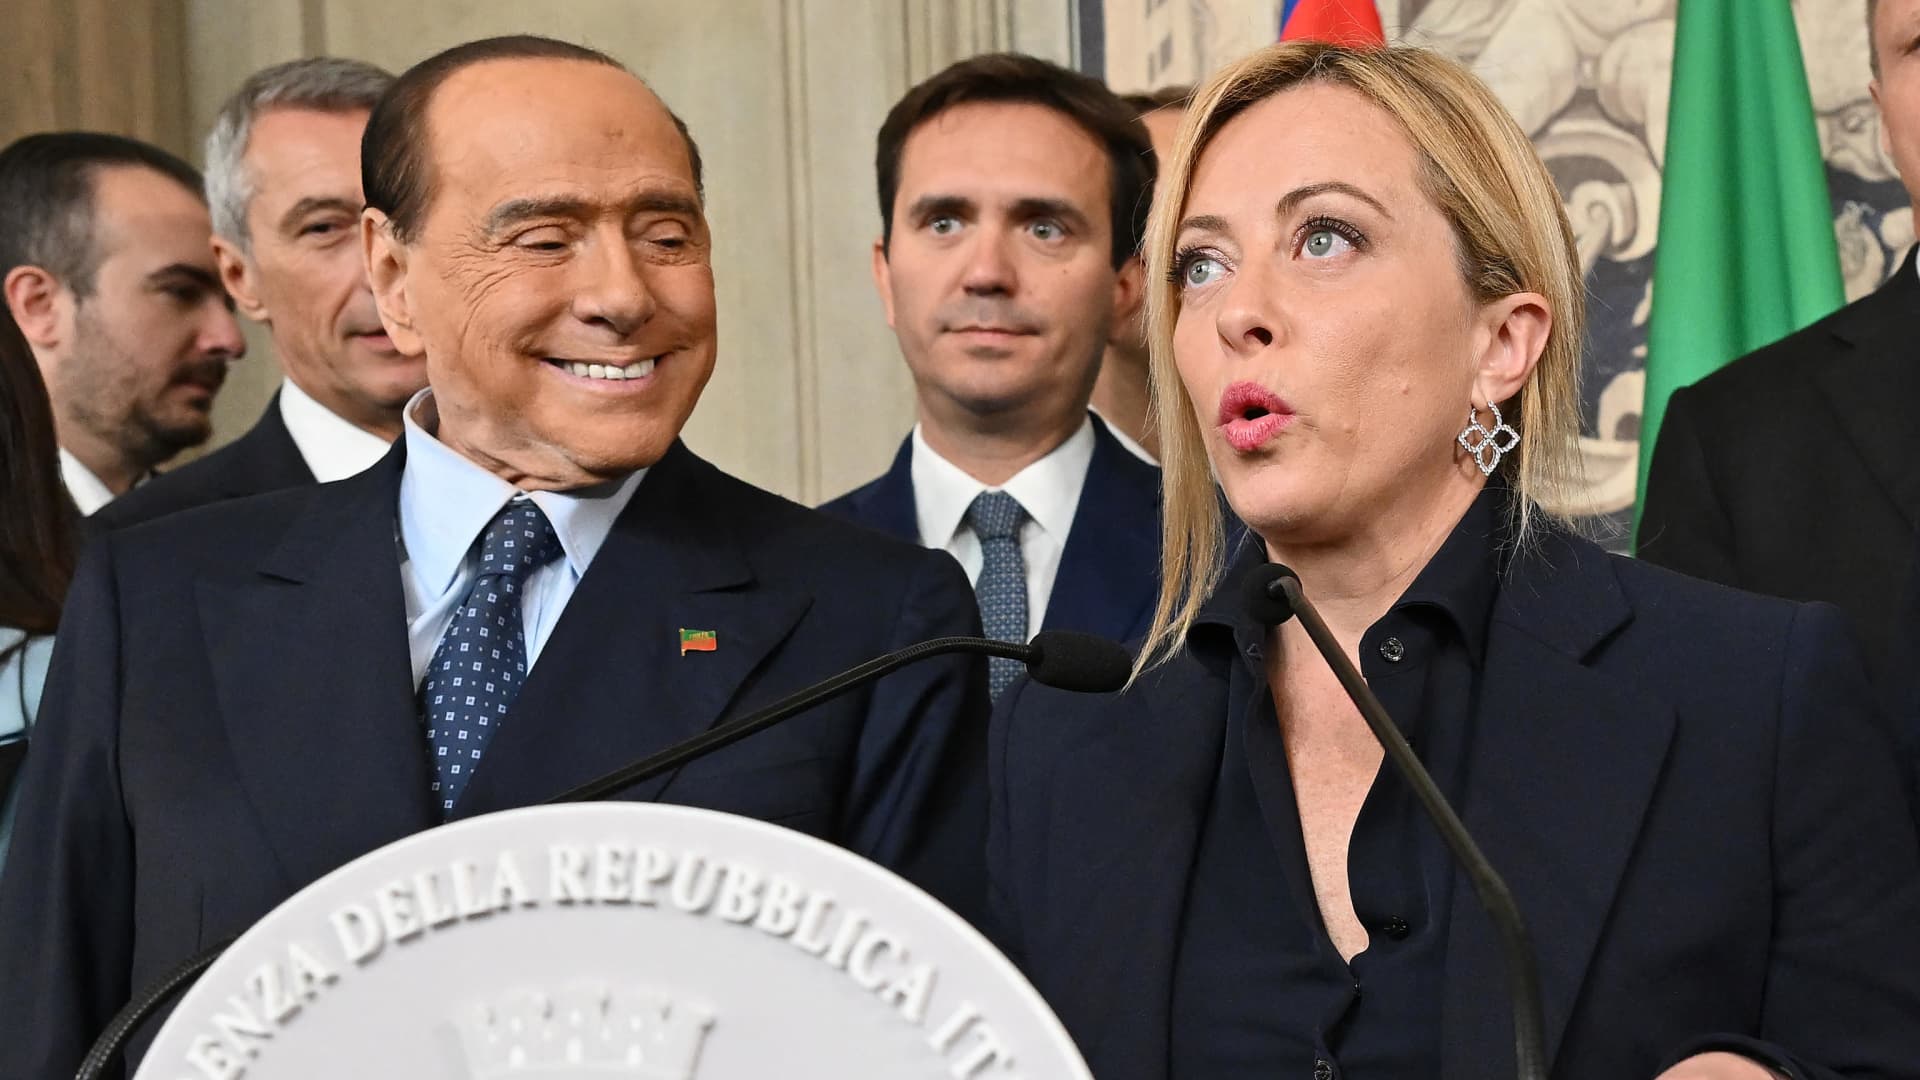 President of the Italian party Fratelli d'Italia (Brothers of Italy) Giorgia Meloni next to former Prime Minister and leader of Forza Italia (FI) party Silvio Berlusconi (L), addresses the media after a meeting with Italian President Sergio Mattarella for the first round of formal political consultations for new government at the Quirinale Palace in Rome on October 21, 2022.